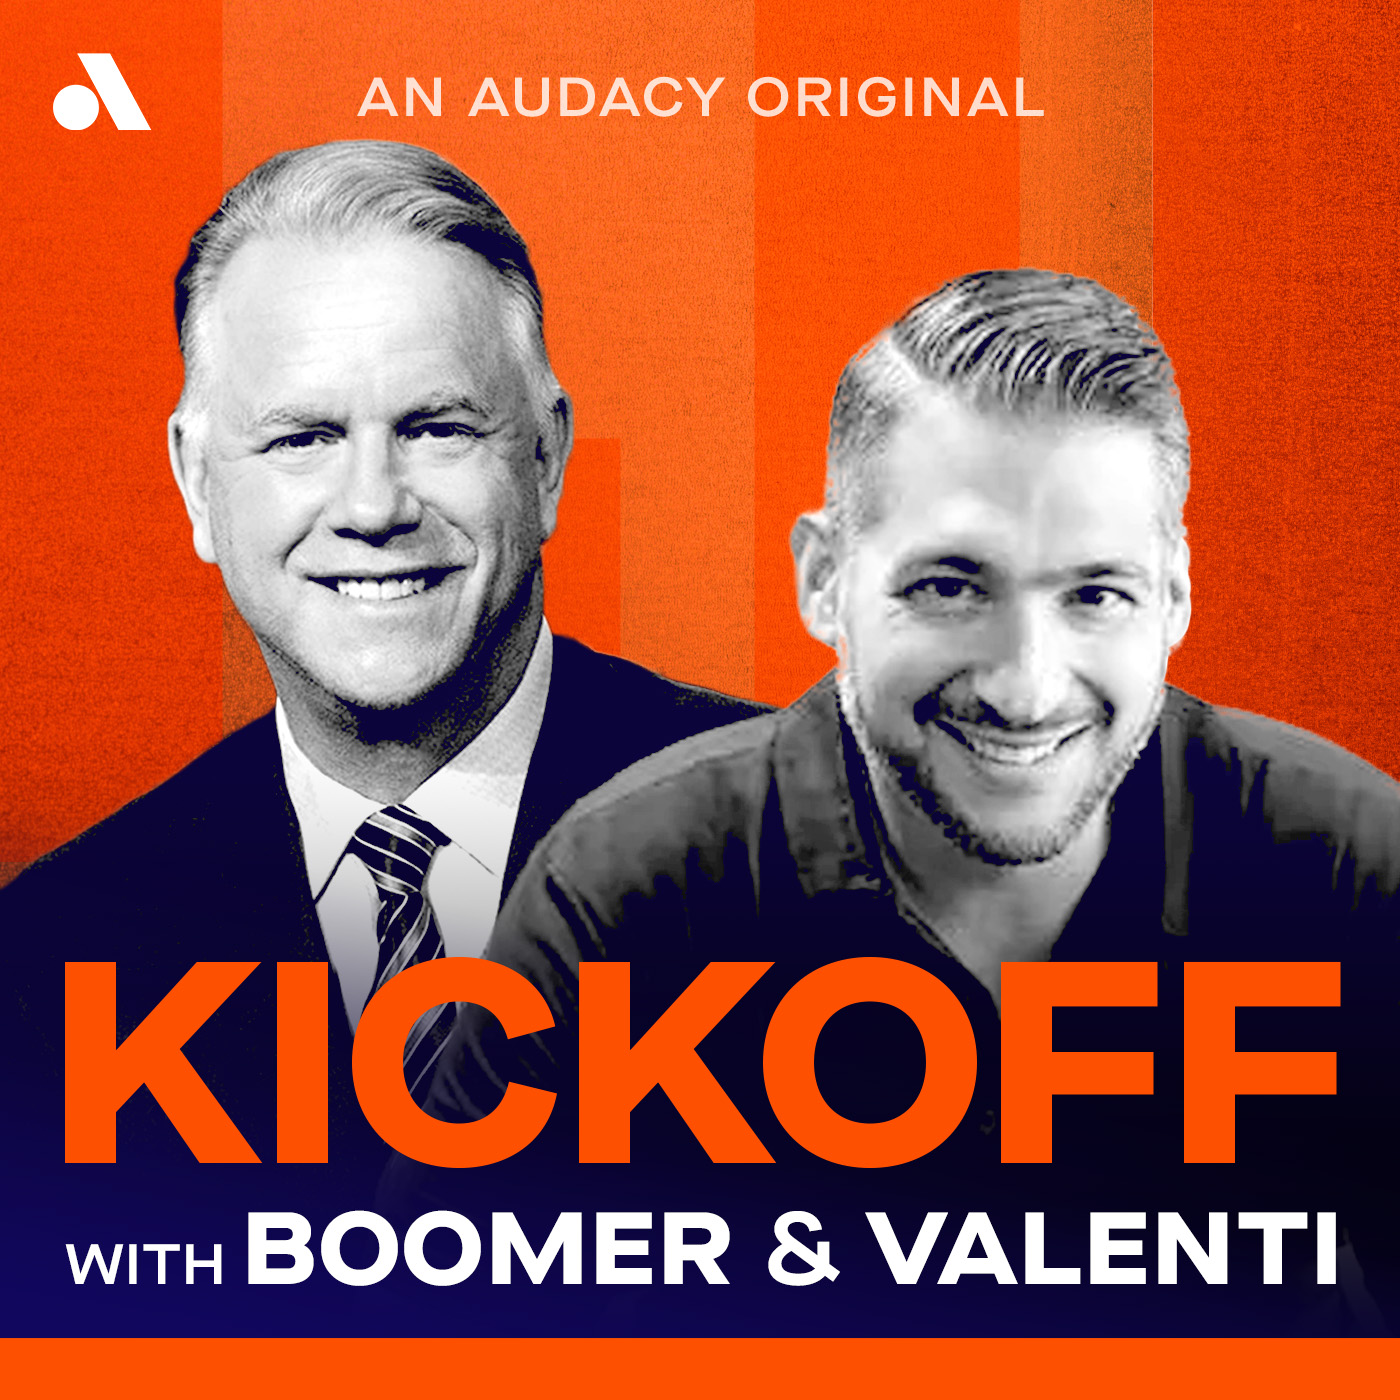 Kickoff with Boomer Esiason and Mike Valenti cover everything in the NFL for week 18